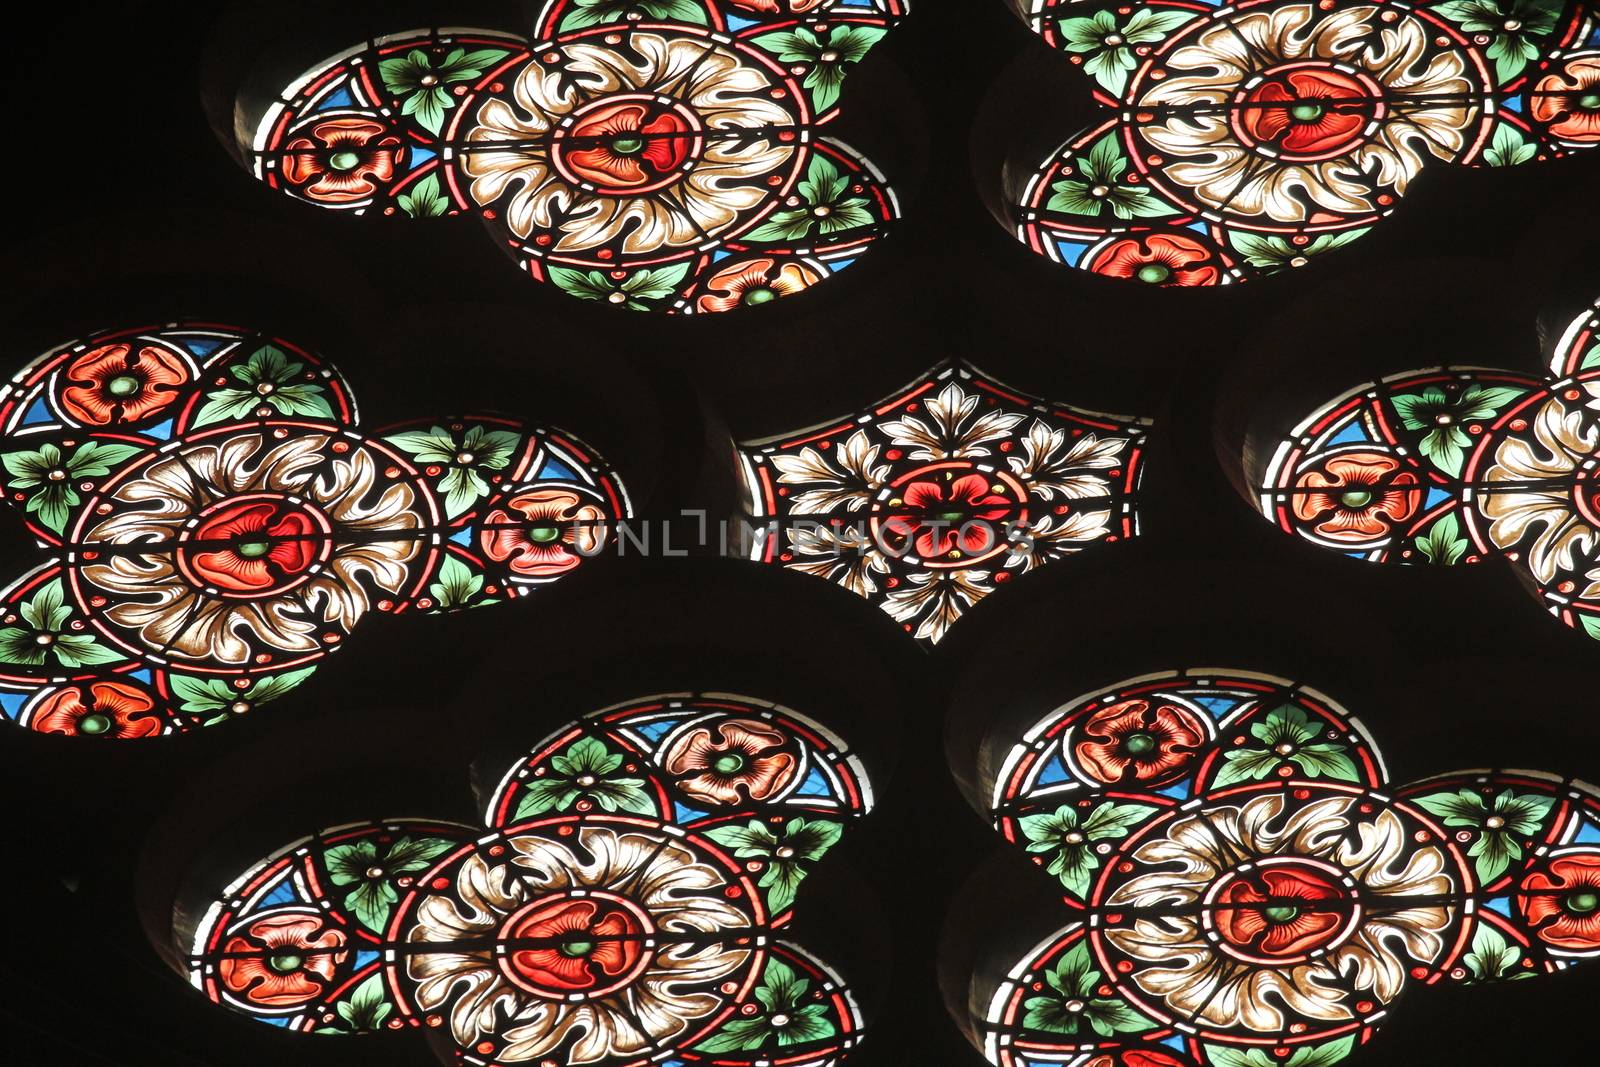 Stained glass in Zagreb cathedral by atlas